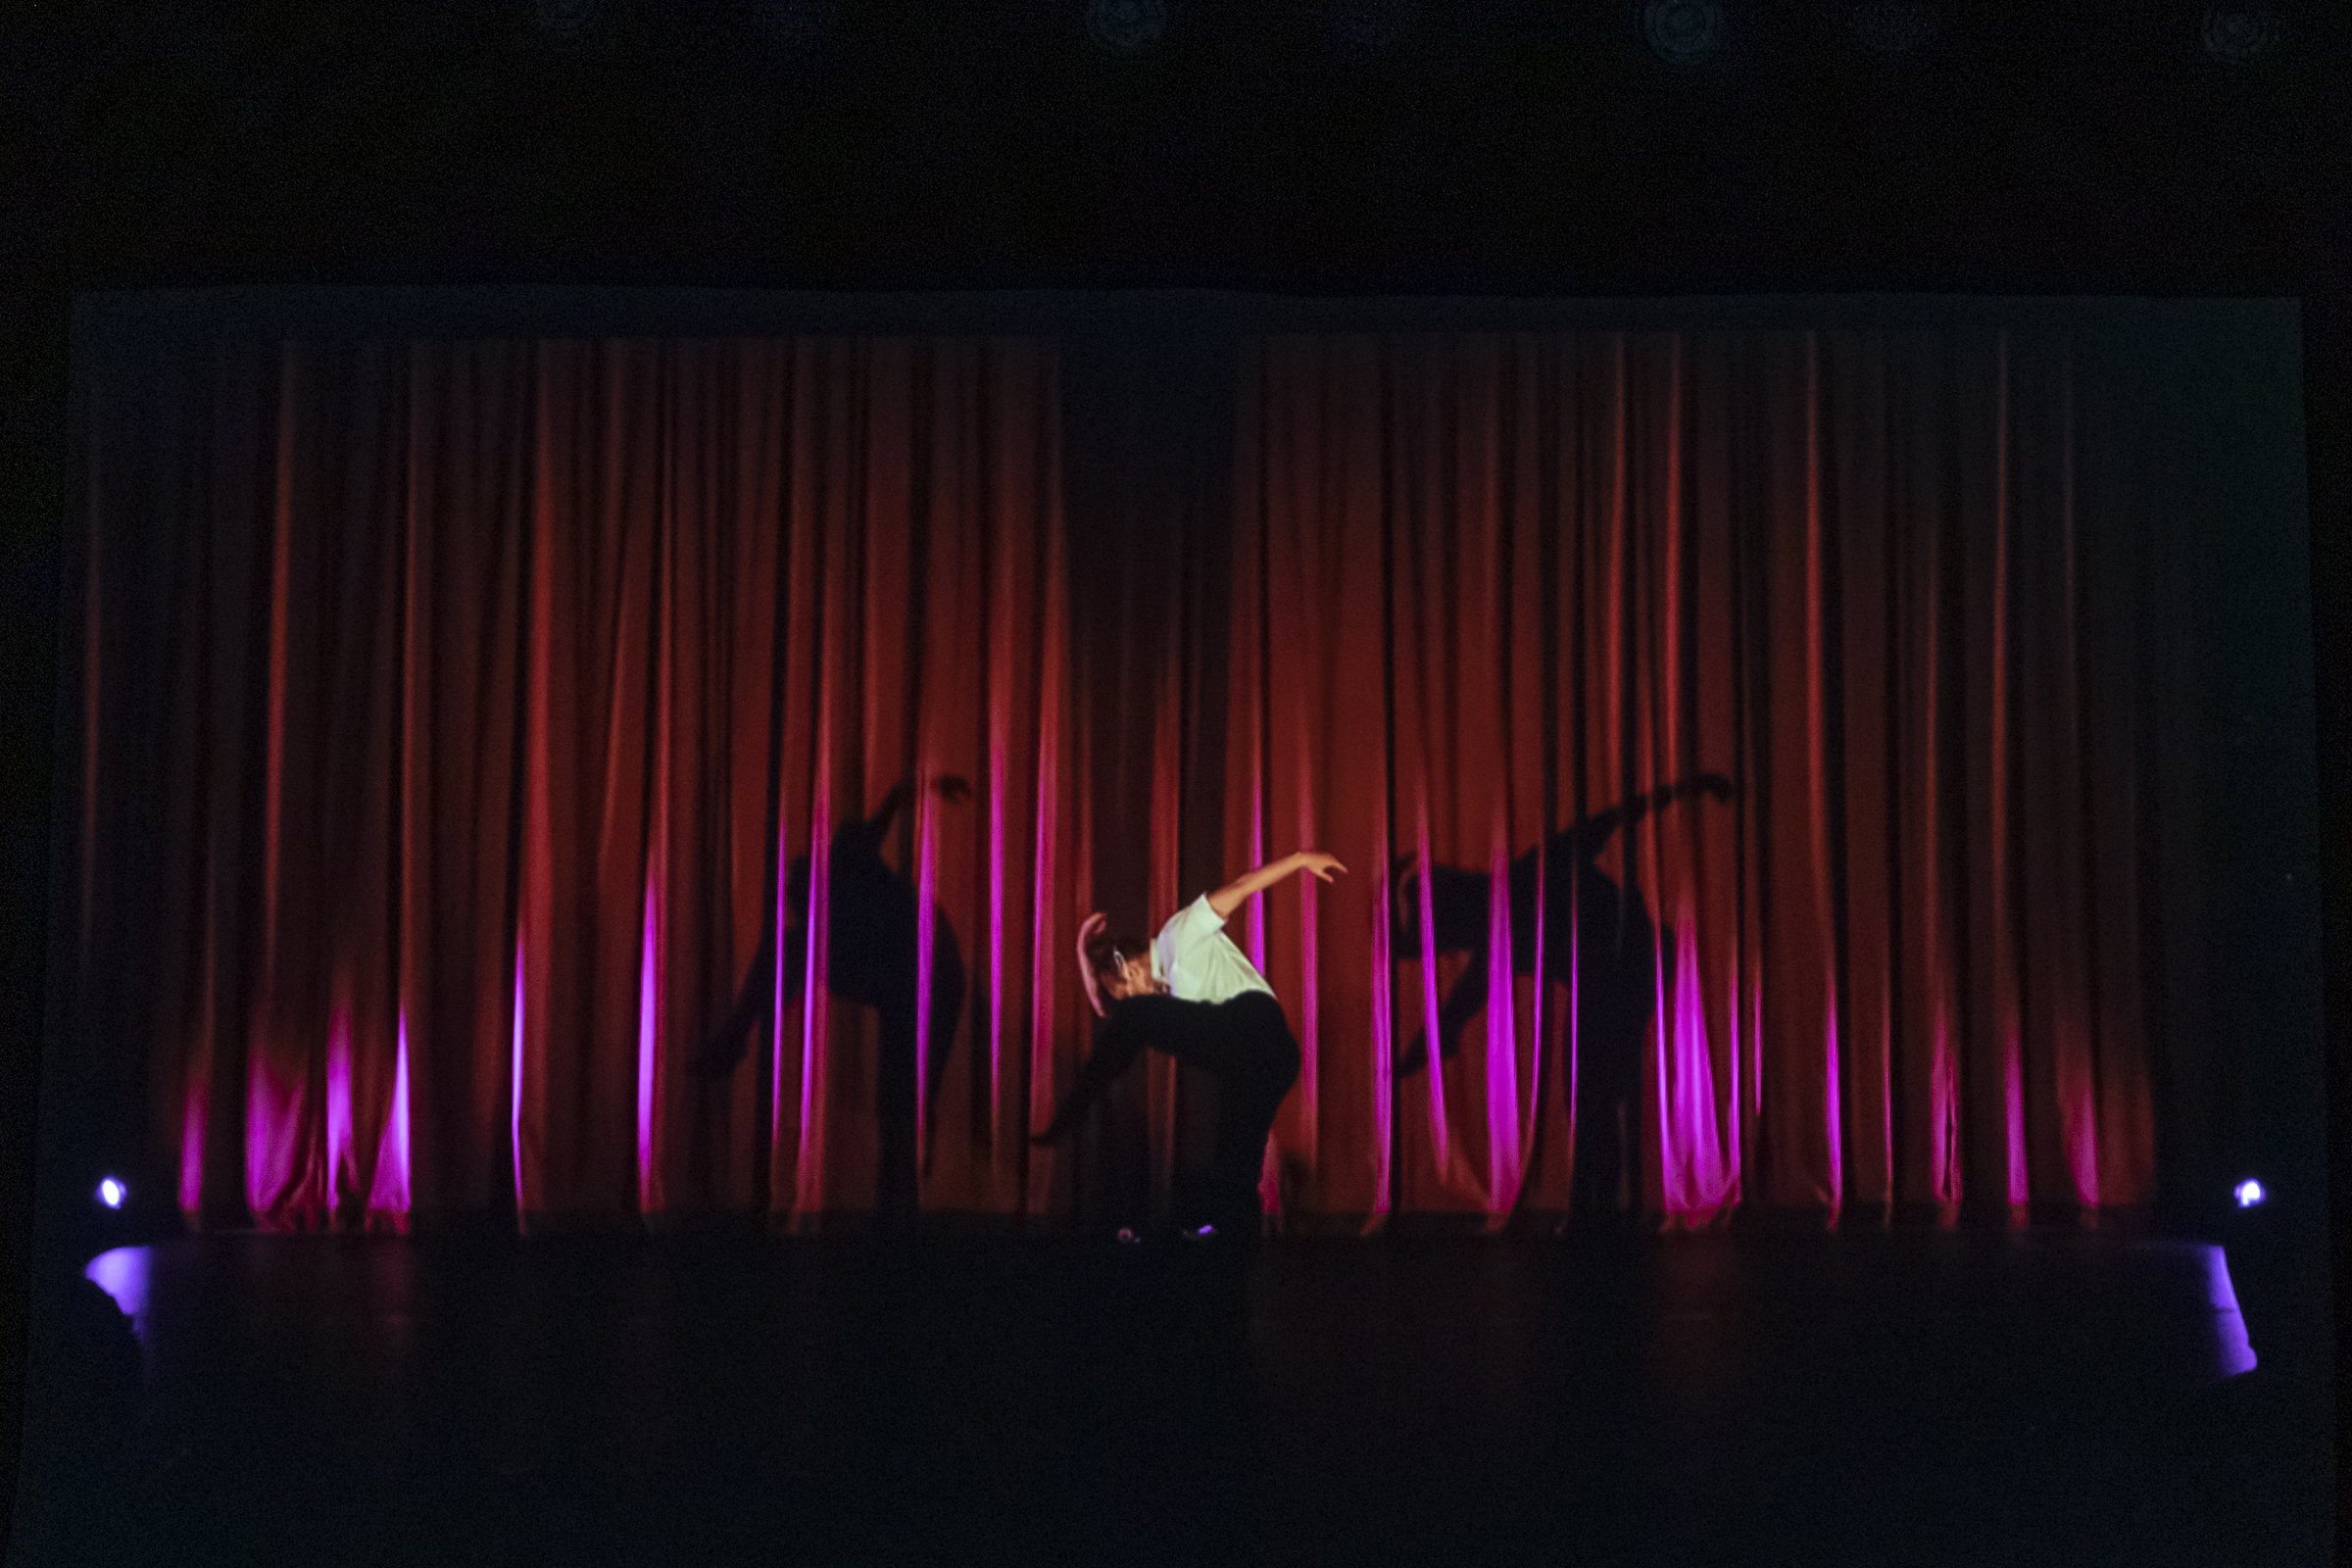 A still from Madeline Maxine-Gorman's "Between Myself" shows her in front of a large red curtain with pink lighting, dancing in a white button-up shirt and black slacks.